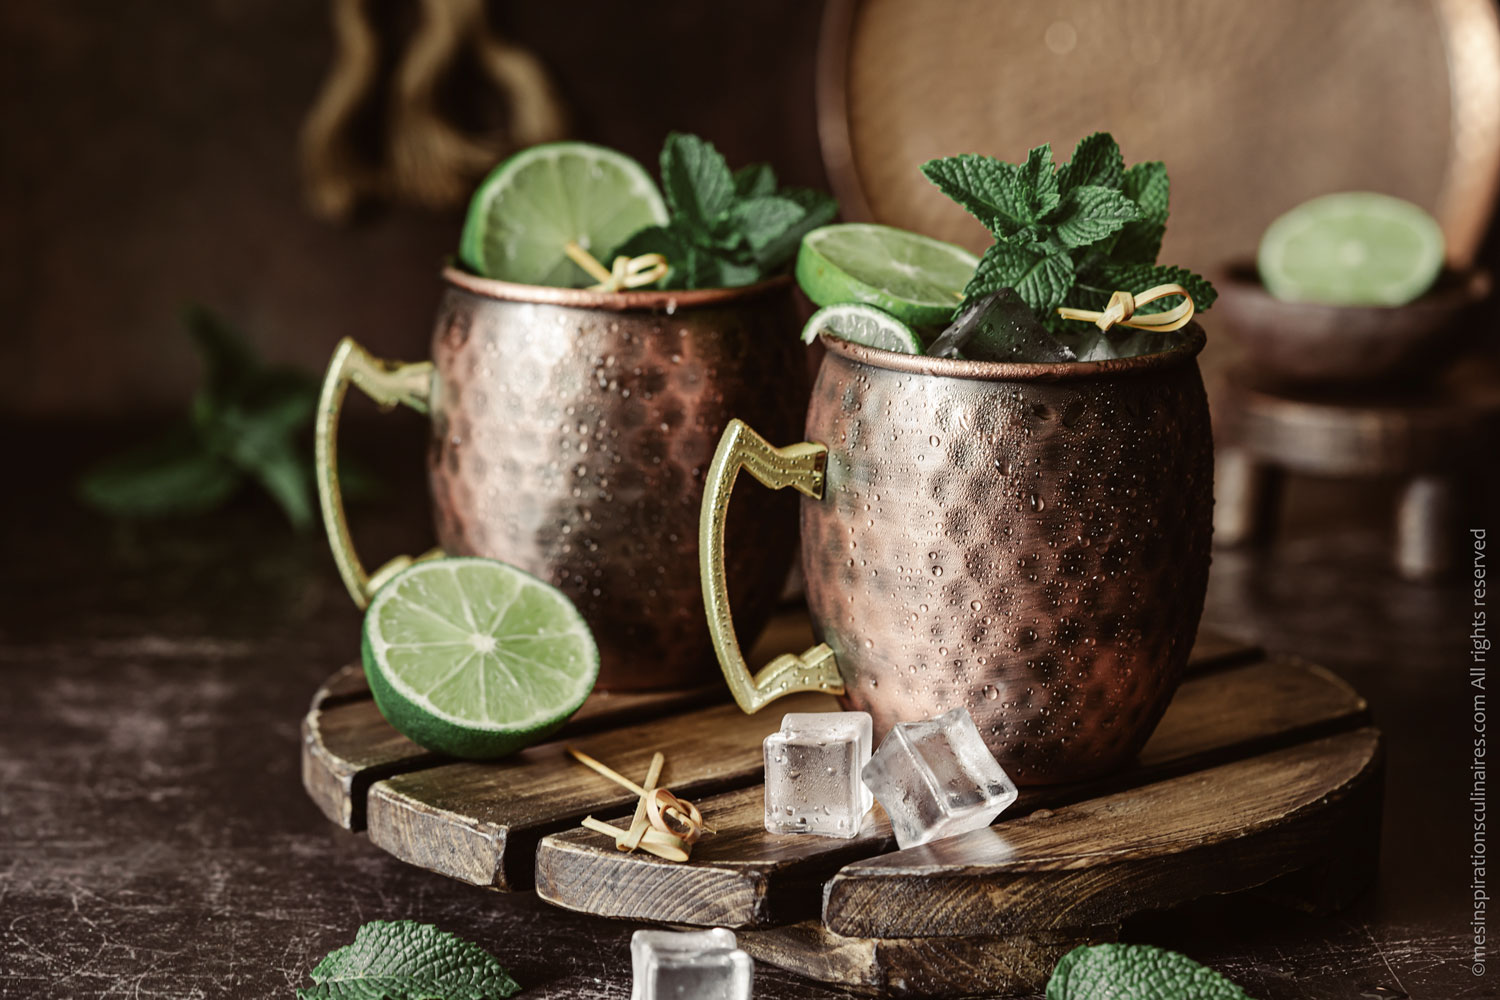 Le Moscow Mule